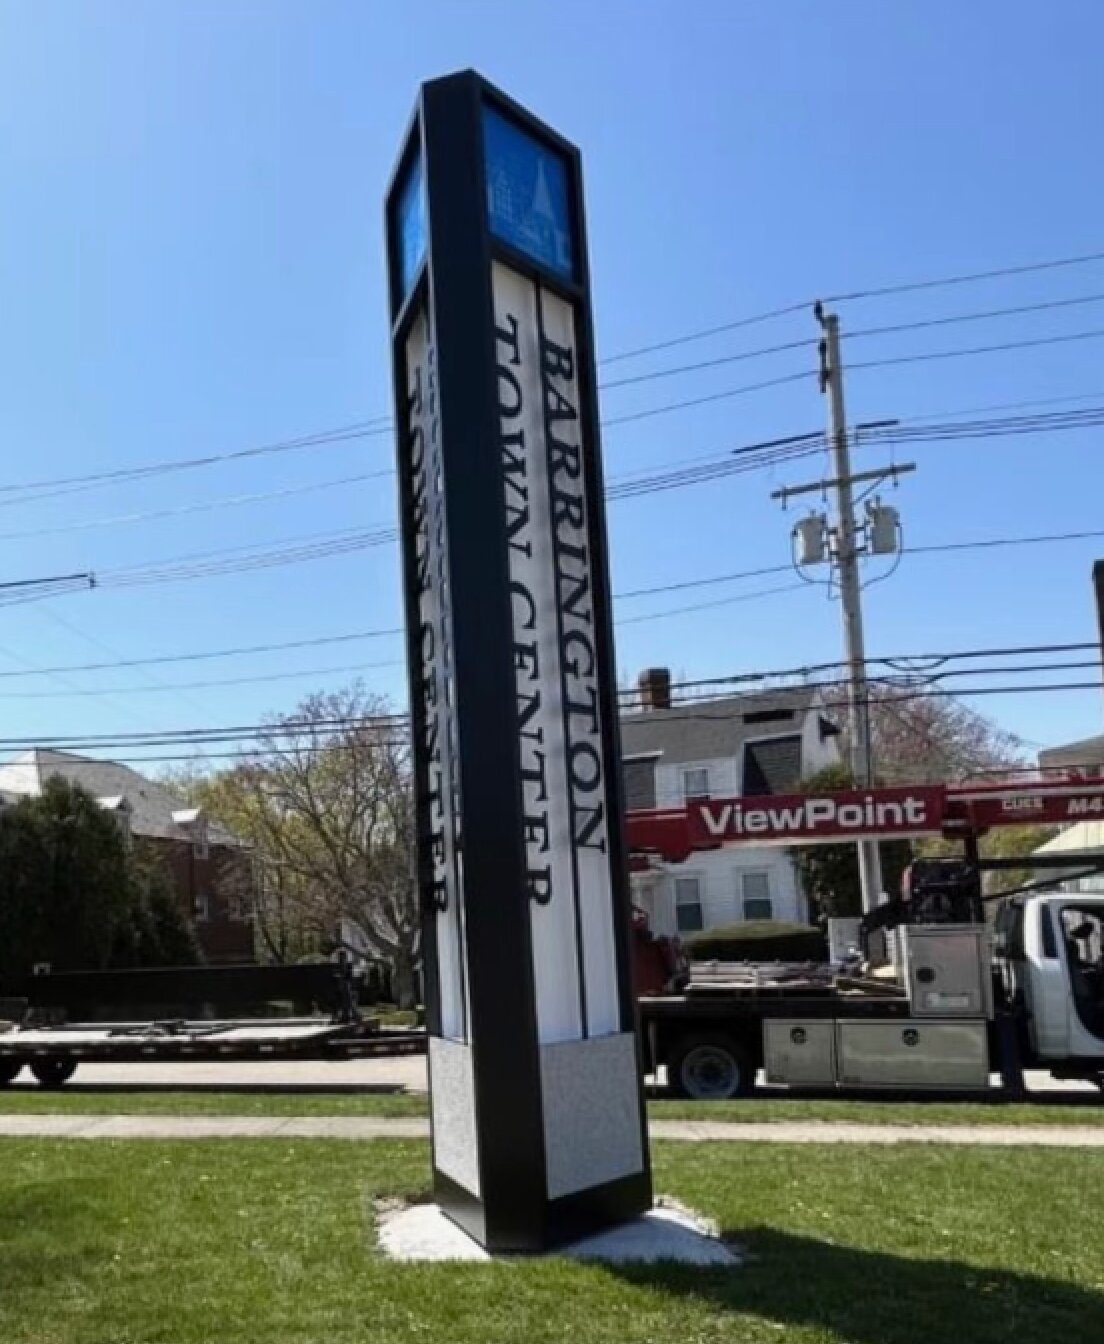 Vertical monument signs including the words “Barrington Town Center” were installed in two locations along County Road late last week.